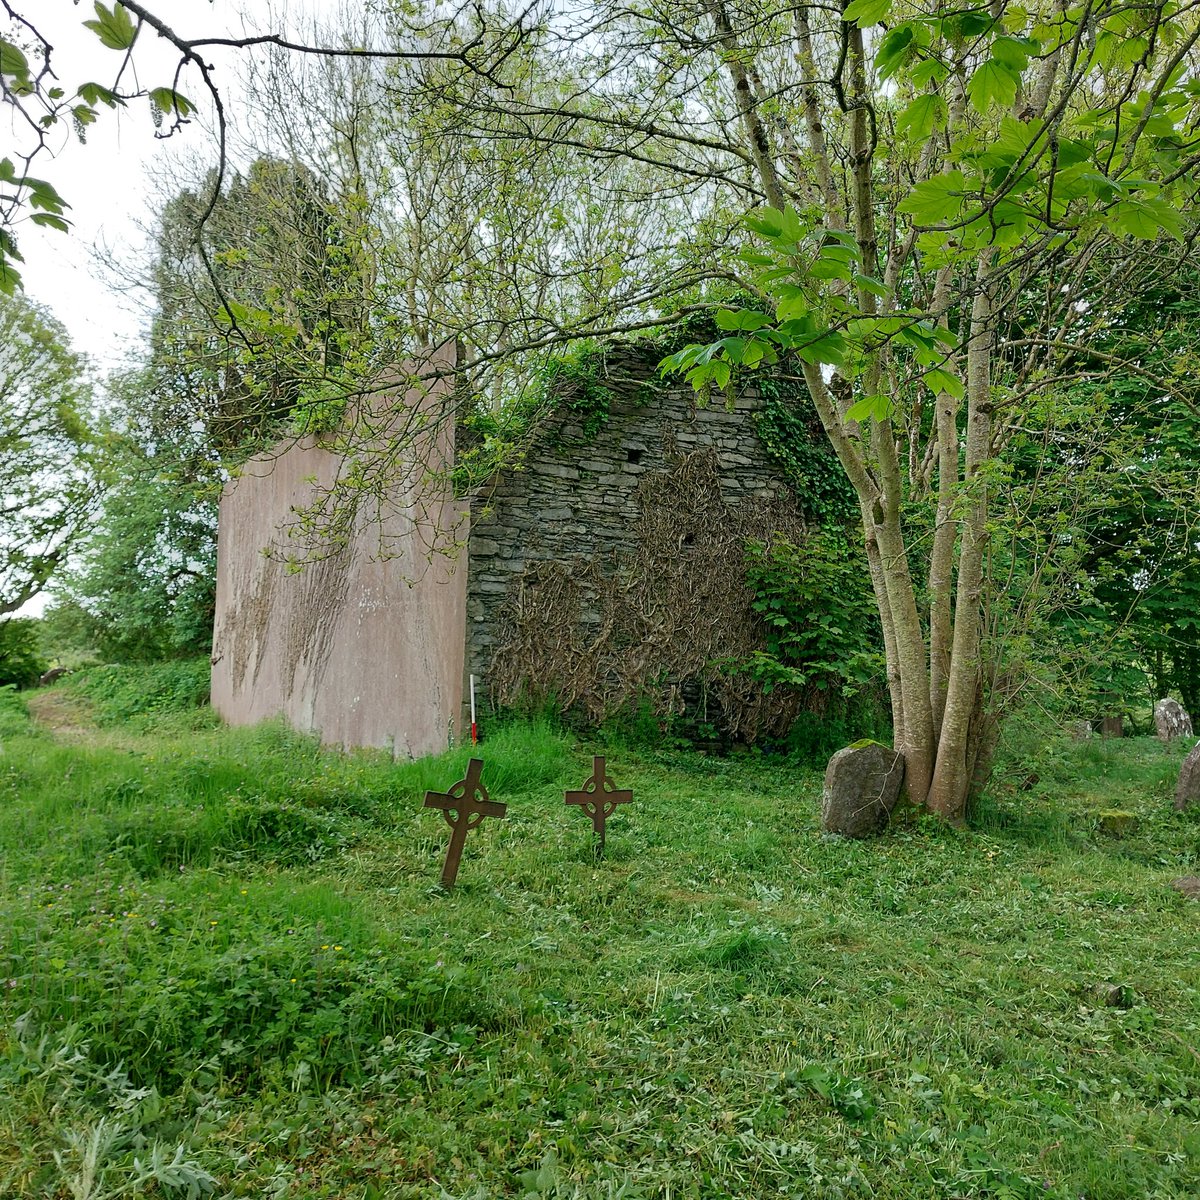 Medieval church ruins at Drinagh, Wexford. Dedicated to St Kevin, much of this nave and chancel church survives intact, including its chancel arch and entrance doorway. Its northern wall, however, was modified in the early 20th century so it could be used as a handball alley